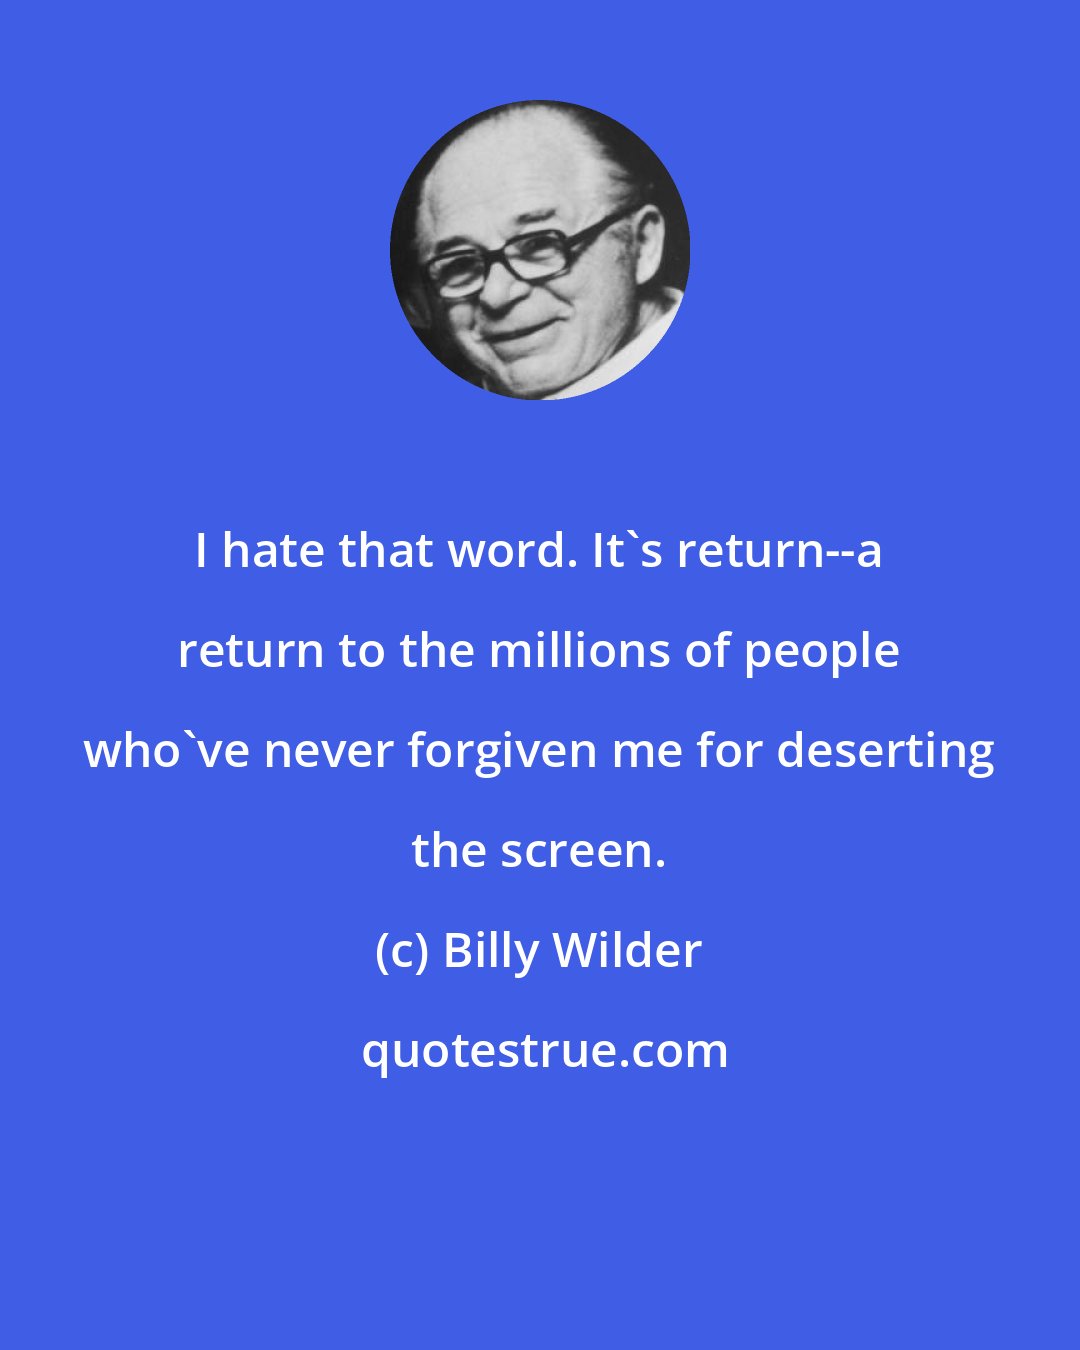 Billy Wilder: I hate that word. It's return--a return to the millions of people who've never forgiven me for deserting the screen.